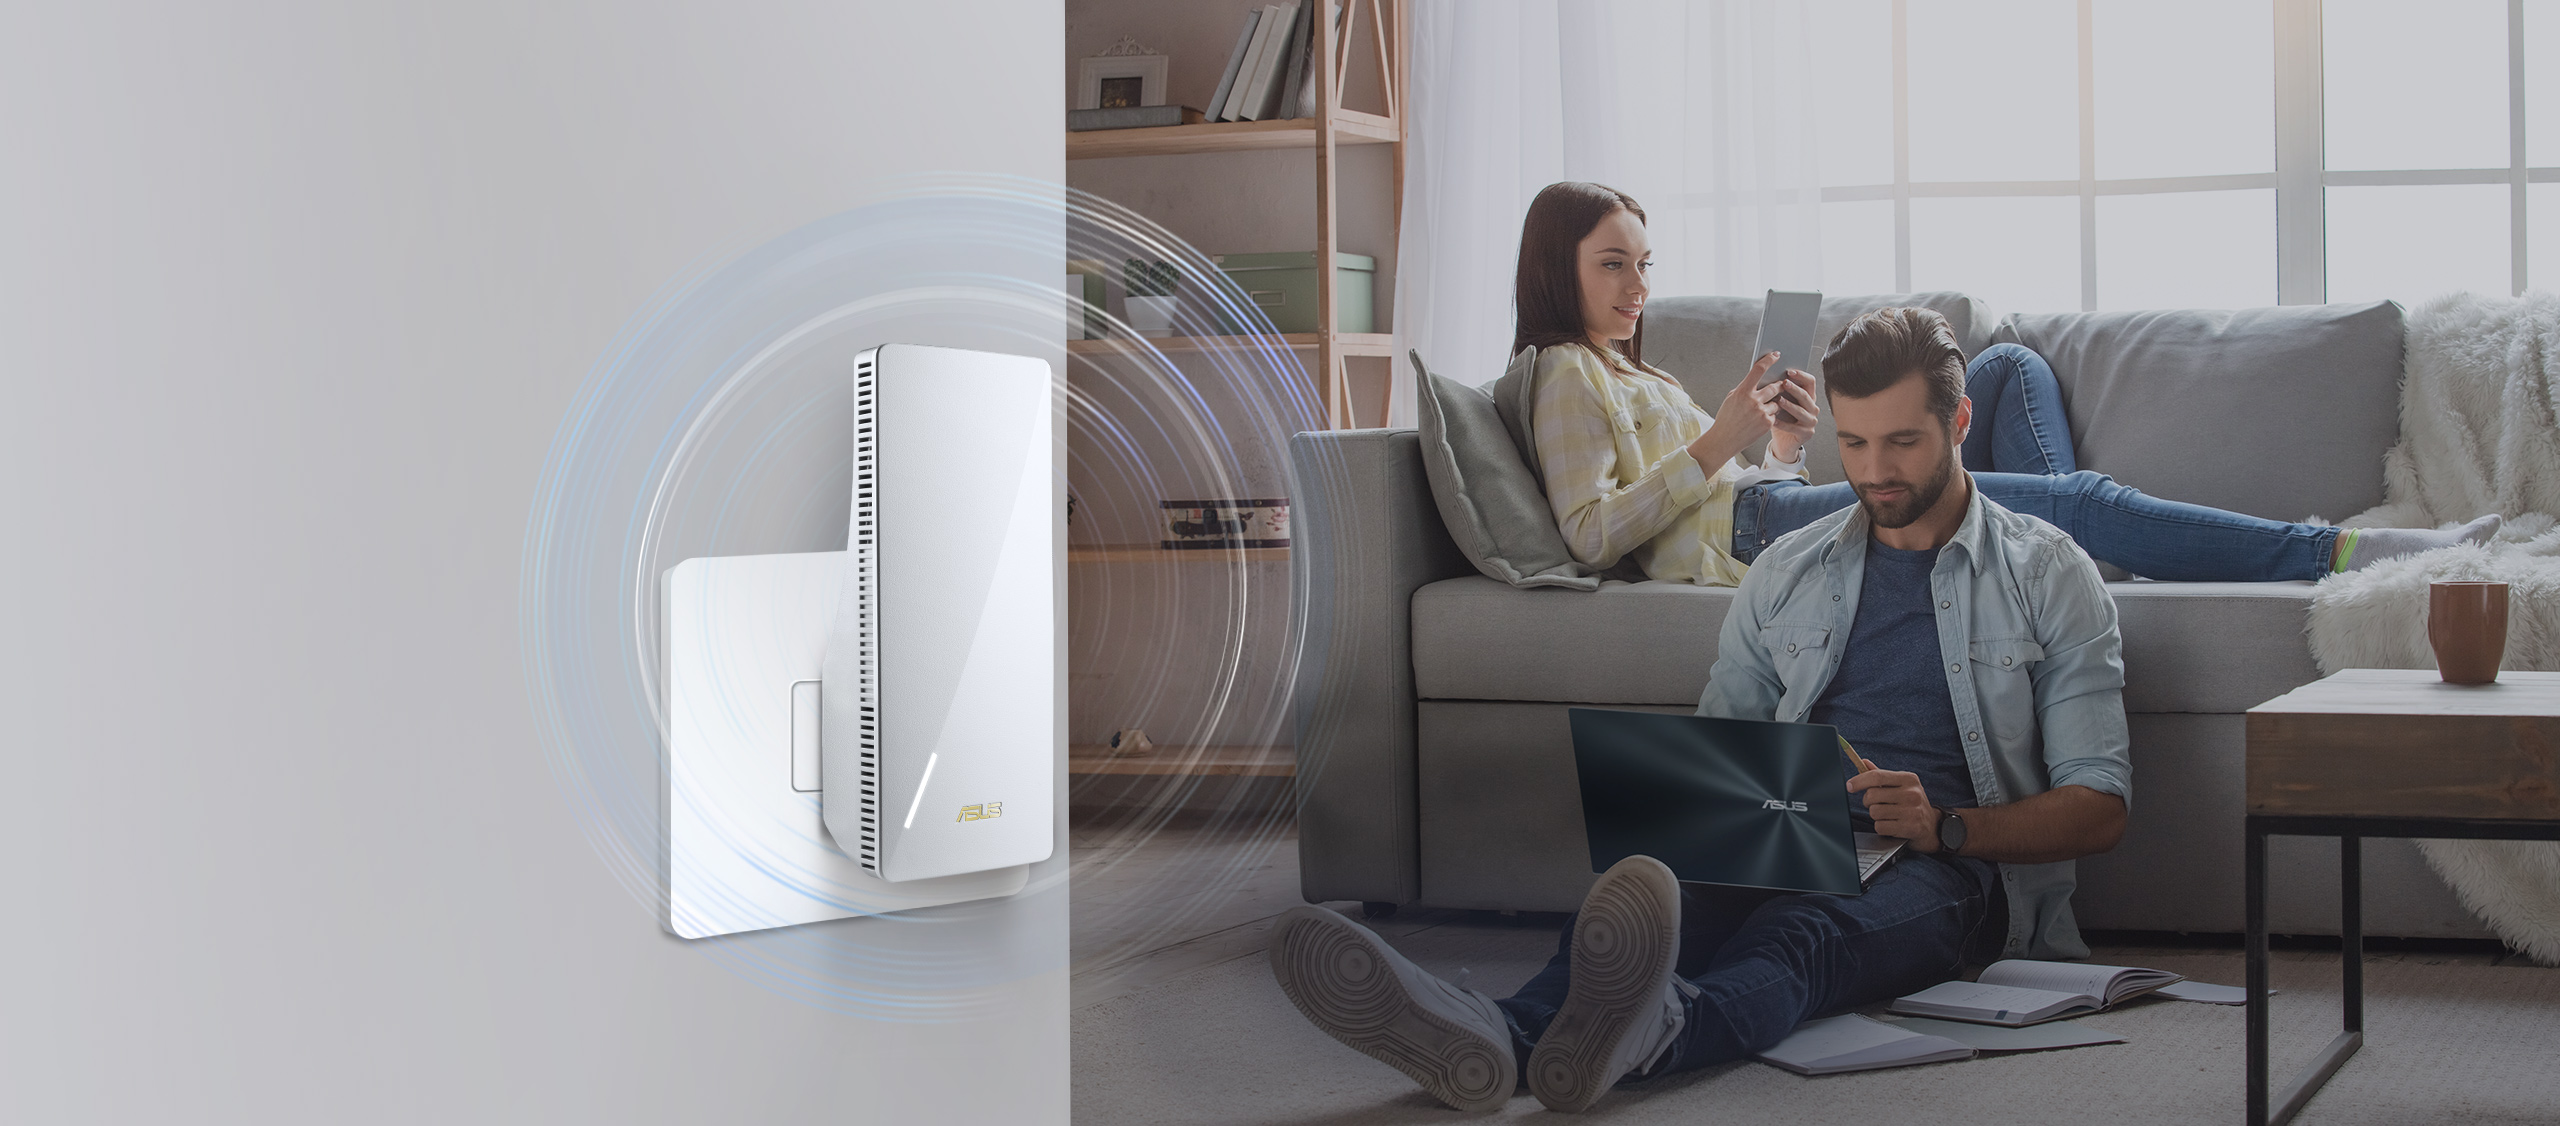 ASUS RP-AX58 dual-band range extender can extend wireless coverage of up to 2200 sq. ft., providing seamless WiFi across your home.